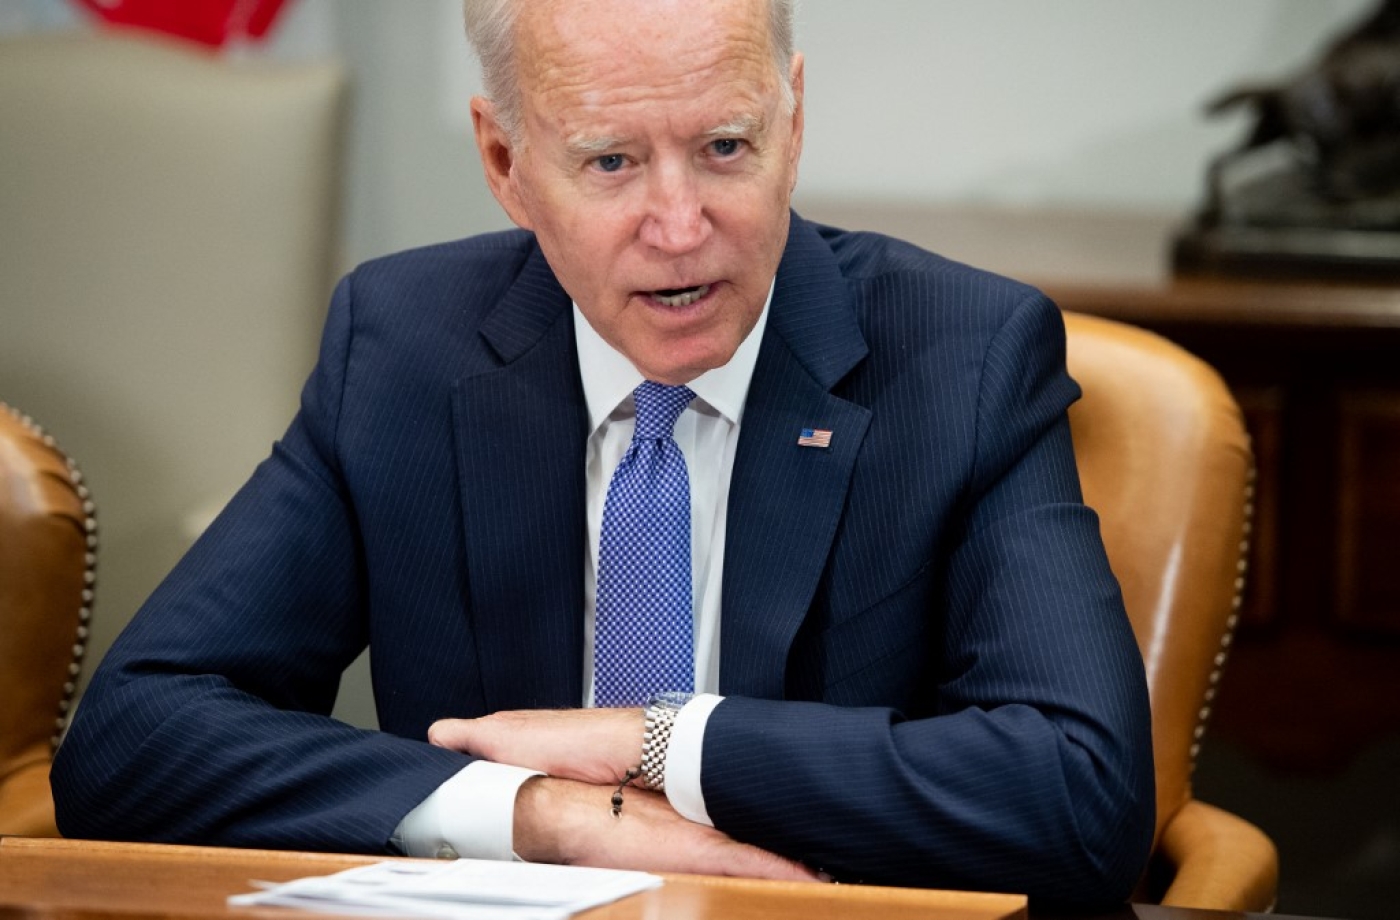 Members of Congress have criticised Biden for continuing arms sales to Egypt as it continues to target Egyptian activists.